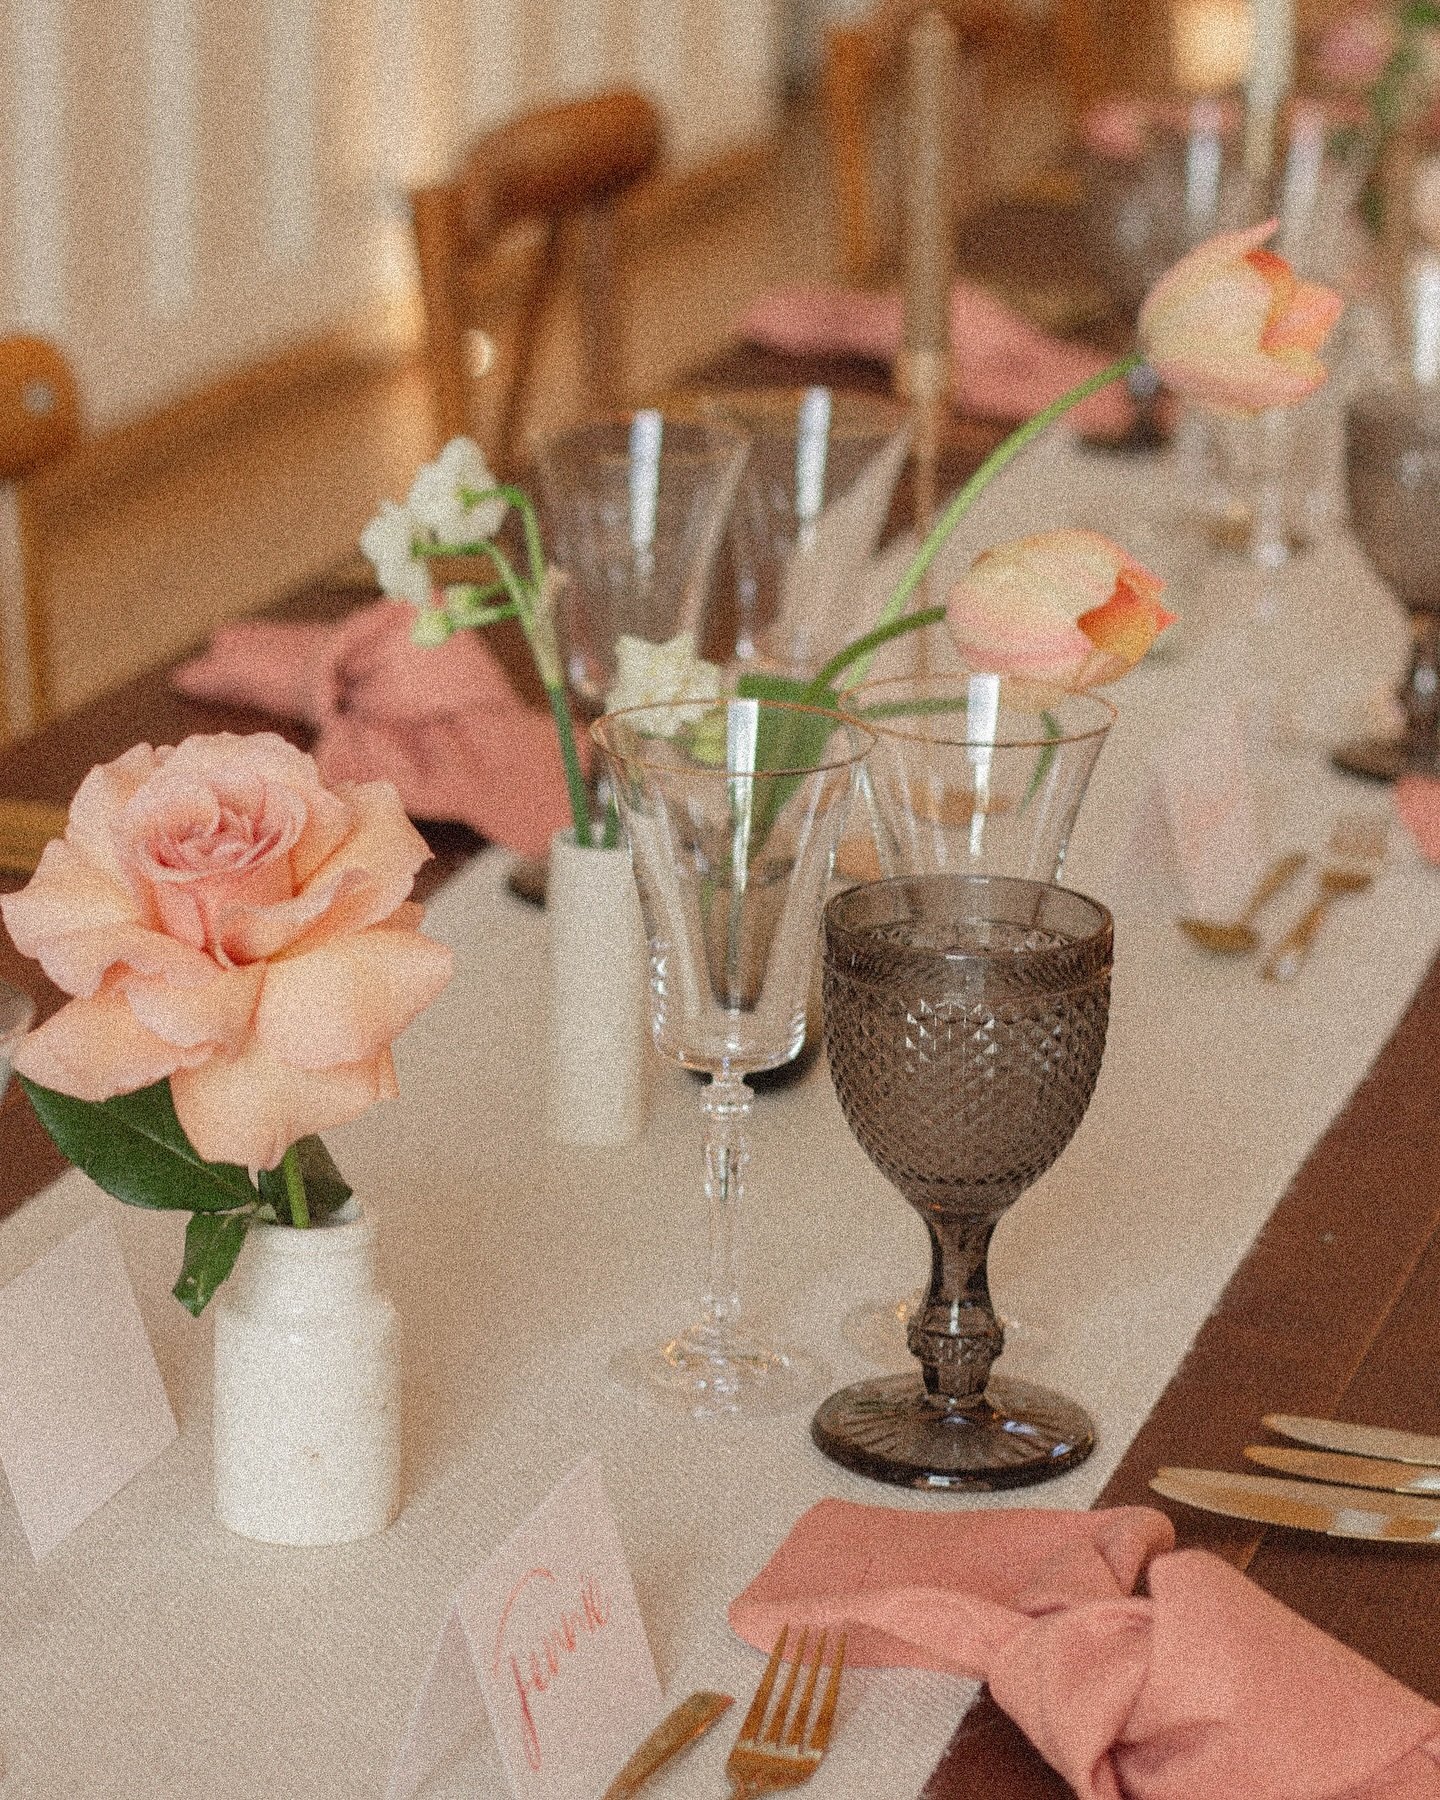 Keeping it simple with peaches &amp; creams 🍑 

Featuring roses, narcissi and tulips, all creating a variety of tones dotted along the table.

@millbridgecourt @kalmkitchenltd @aisling_erin_design @oltan_photography